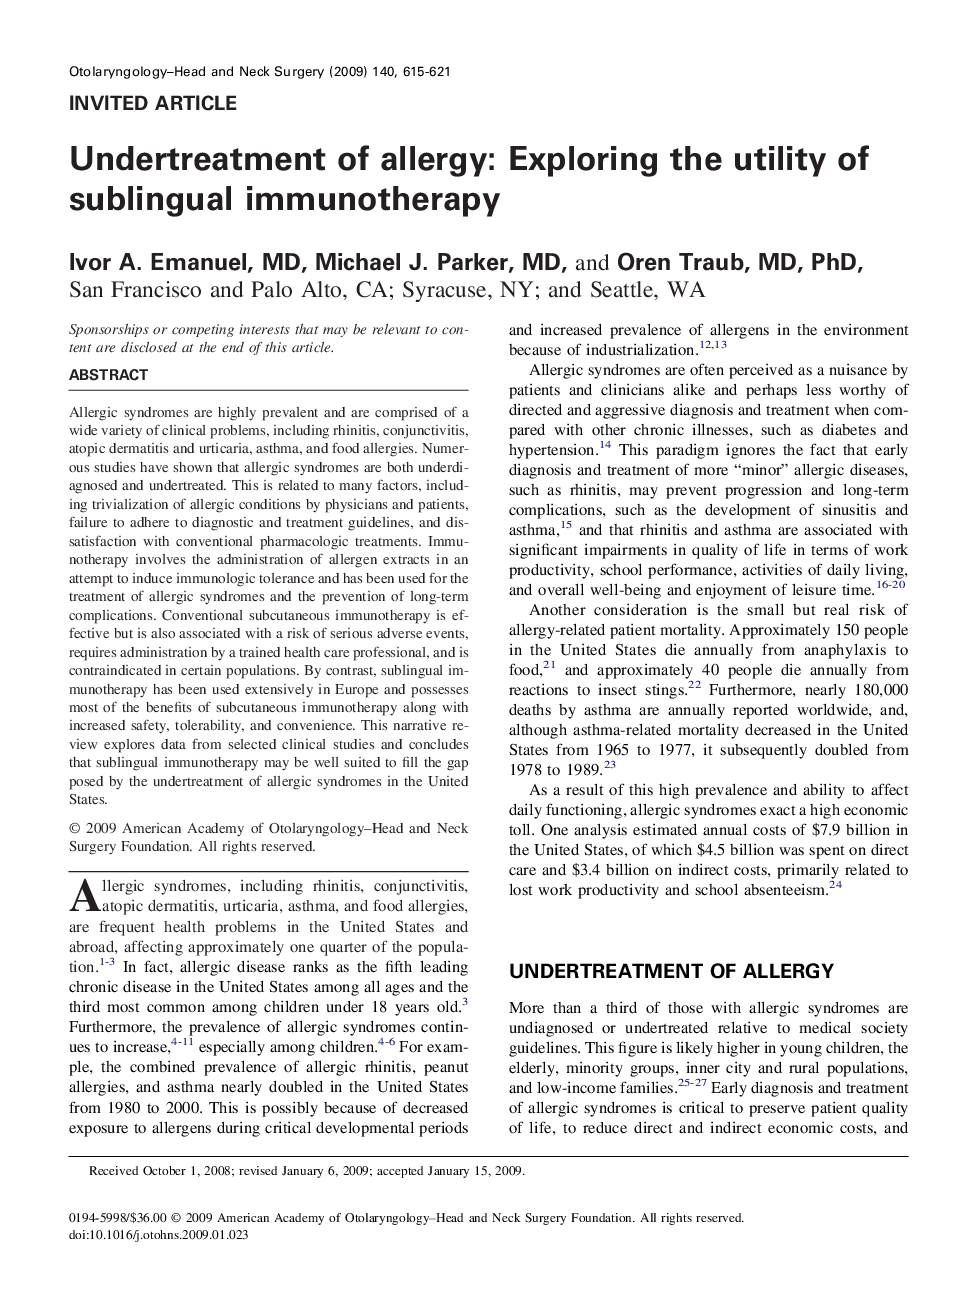 Undertreatment of allergy: Exploring the utility of sublingual immunotherapy